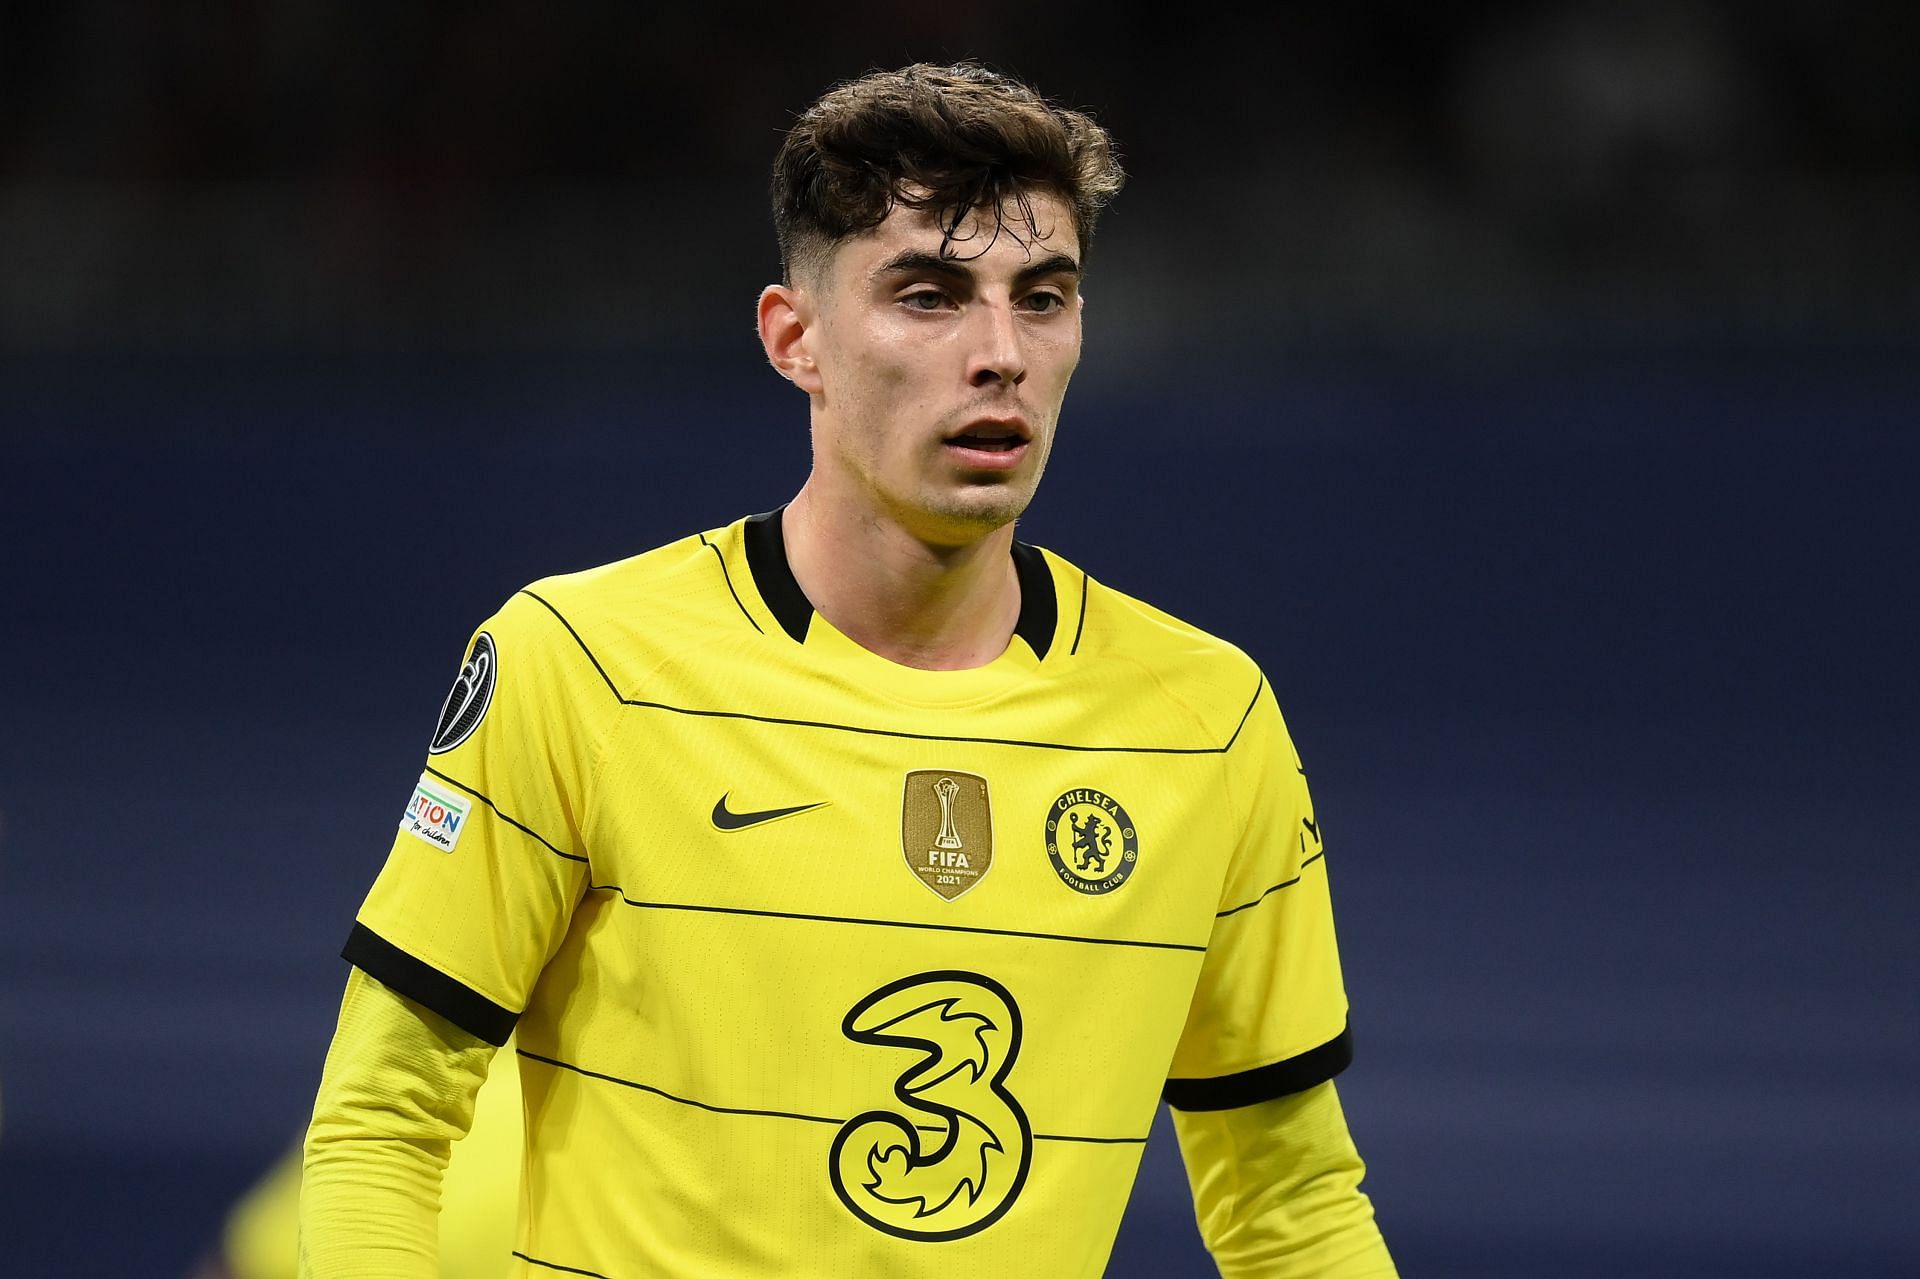 Havertz is one of the best young players in Europe